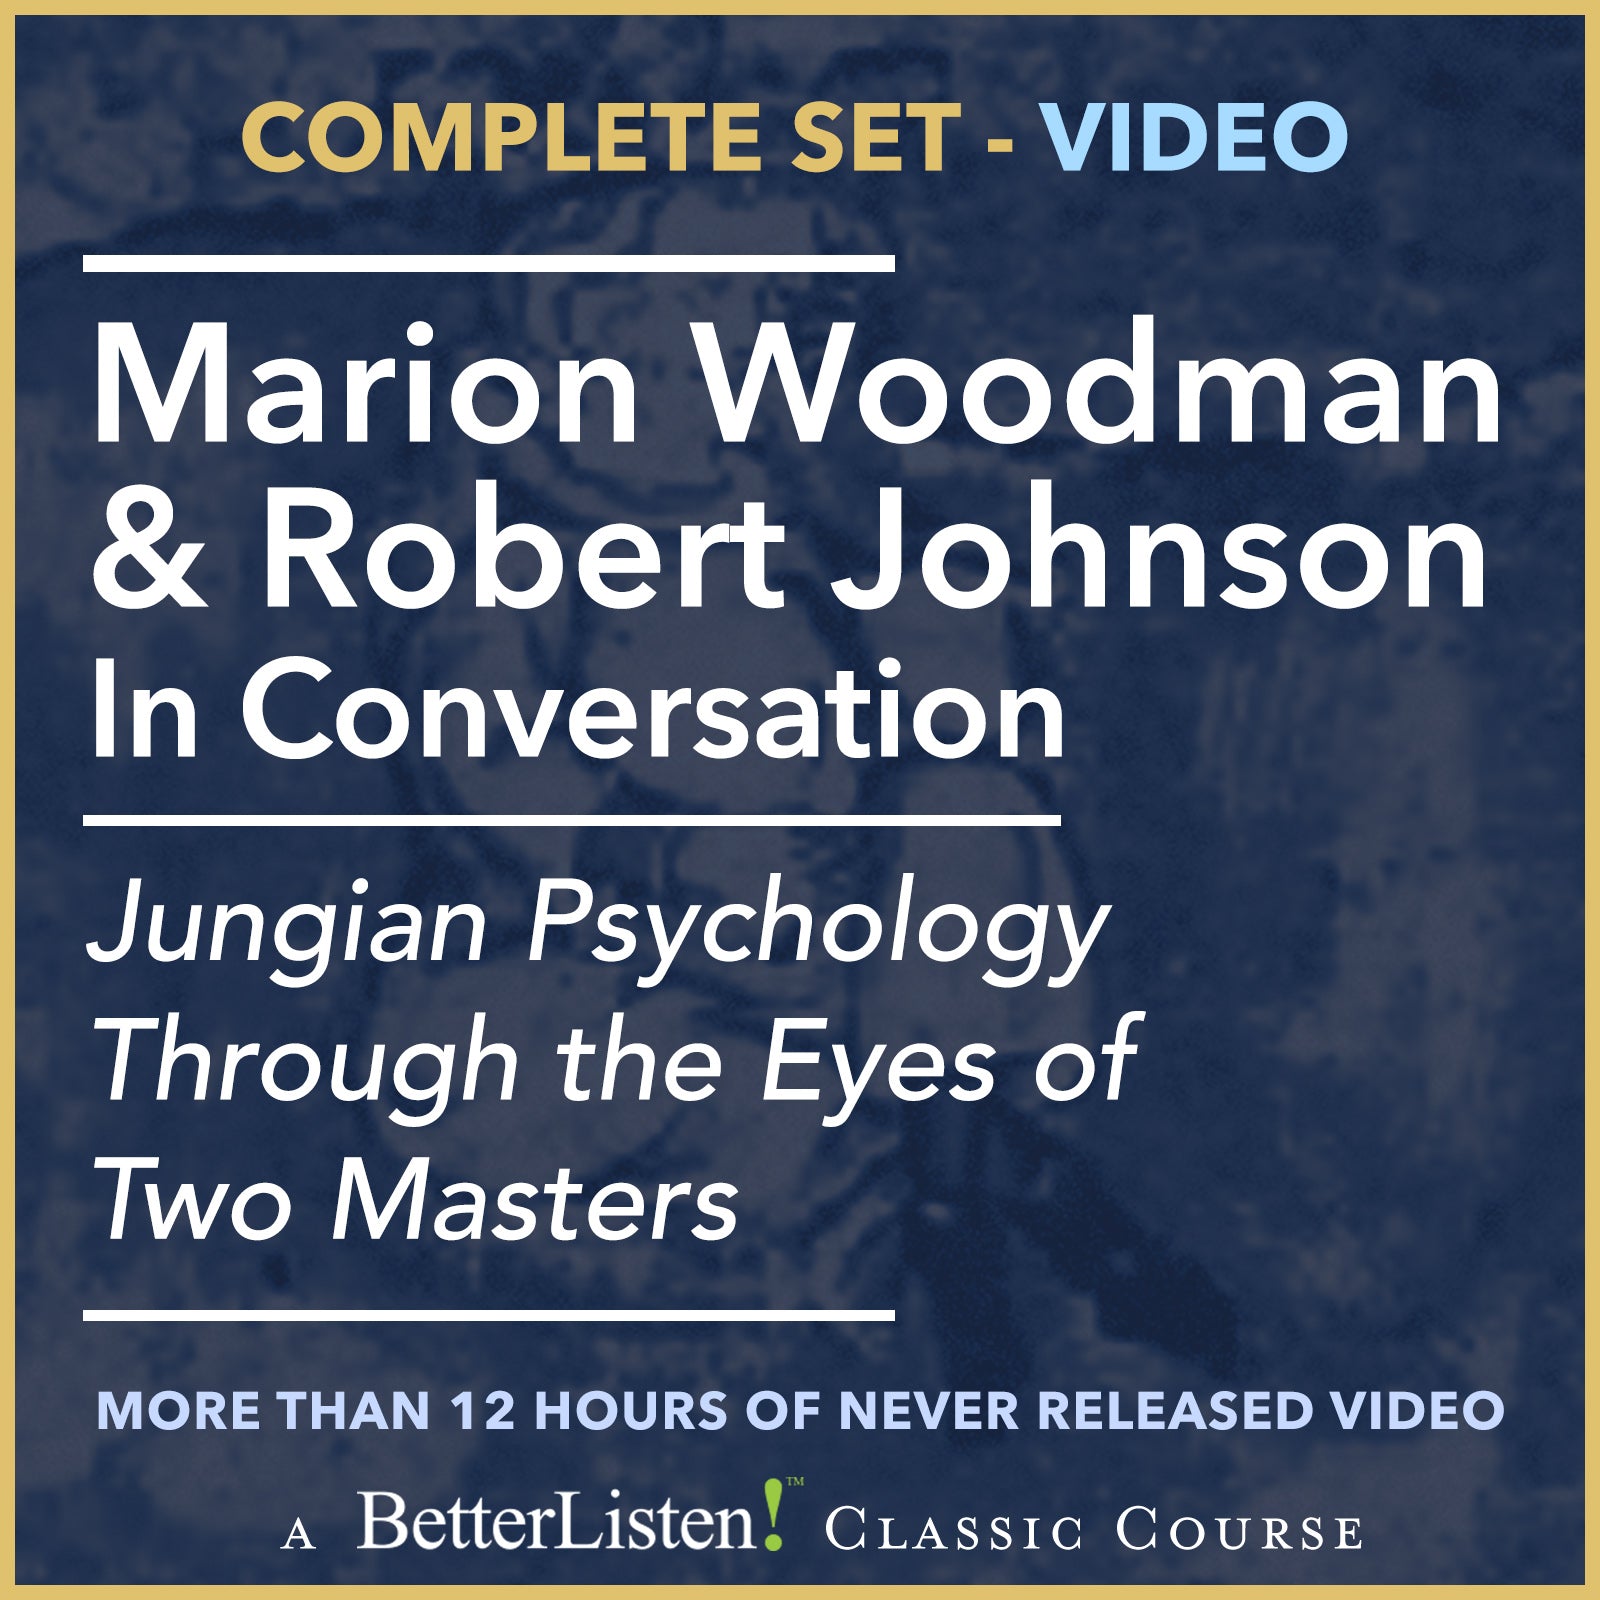 Marion Woodman & Robert Johnson In Conversation: Complete Set of VIDEO, Jungian Psychology Through The Eyes of Two Masters